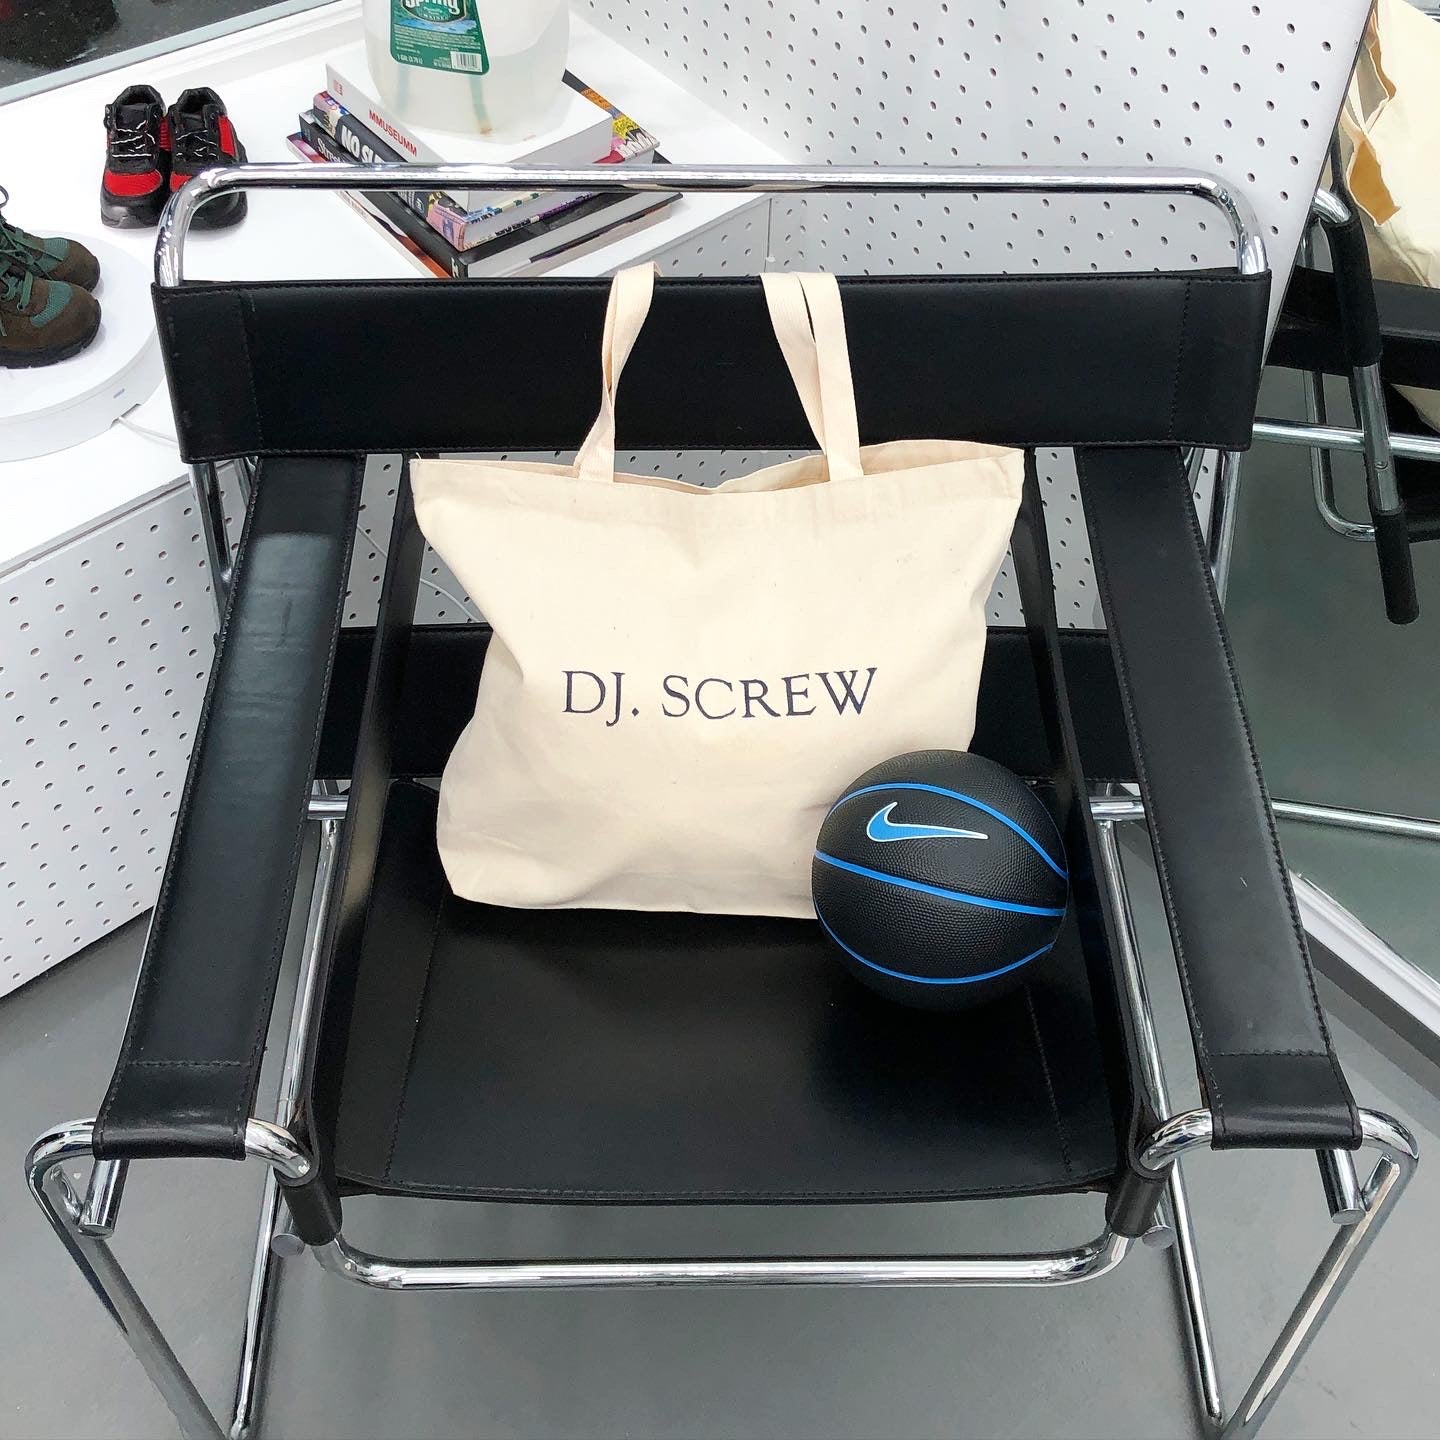 J.Crew Chopped and Screwed Tote Bag Drawn with Sharpie by YOBS SPORT